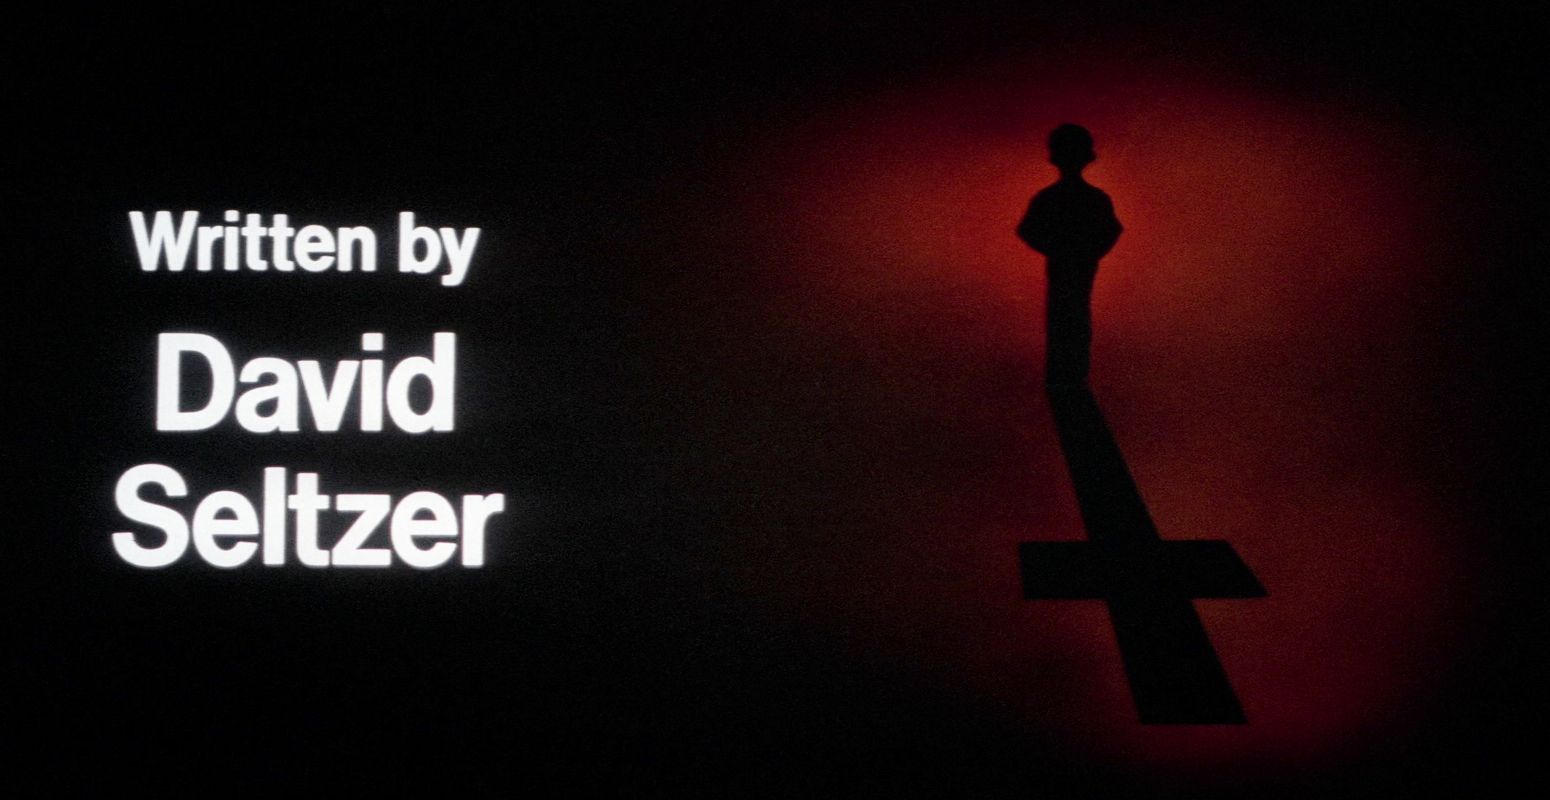 The Omen main title card for David Seltzer reads, 